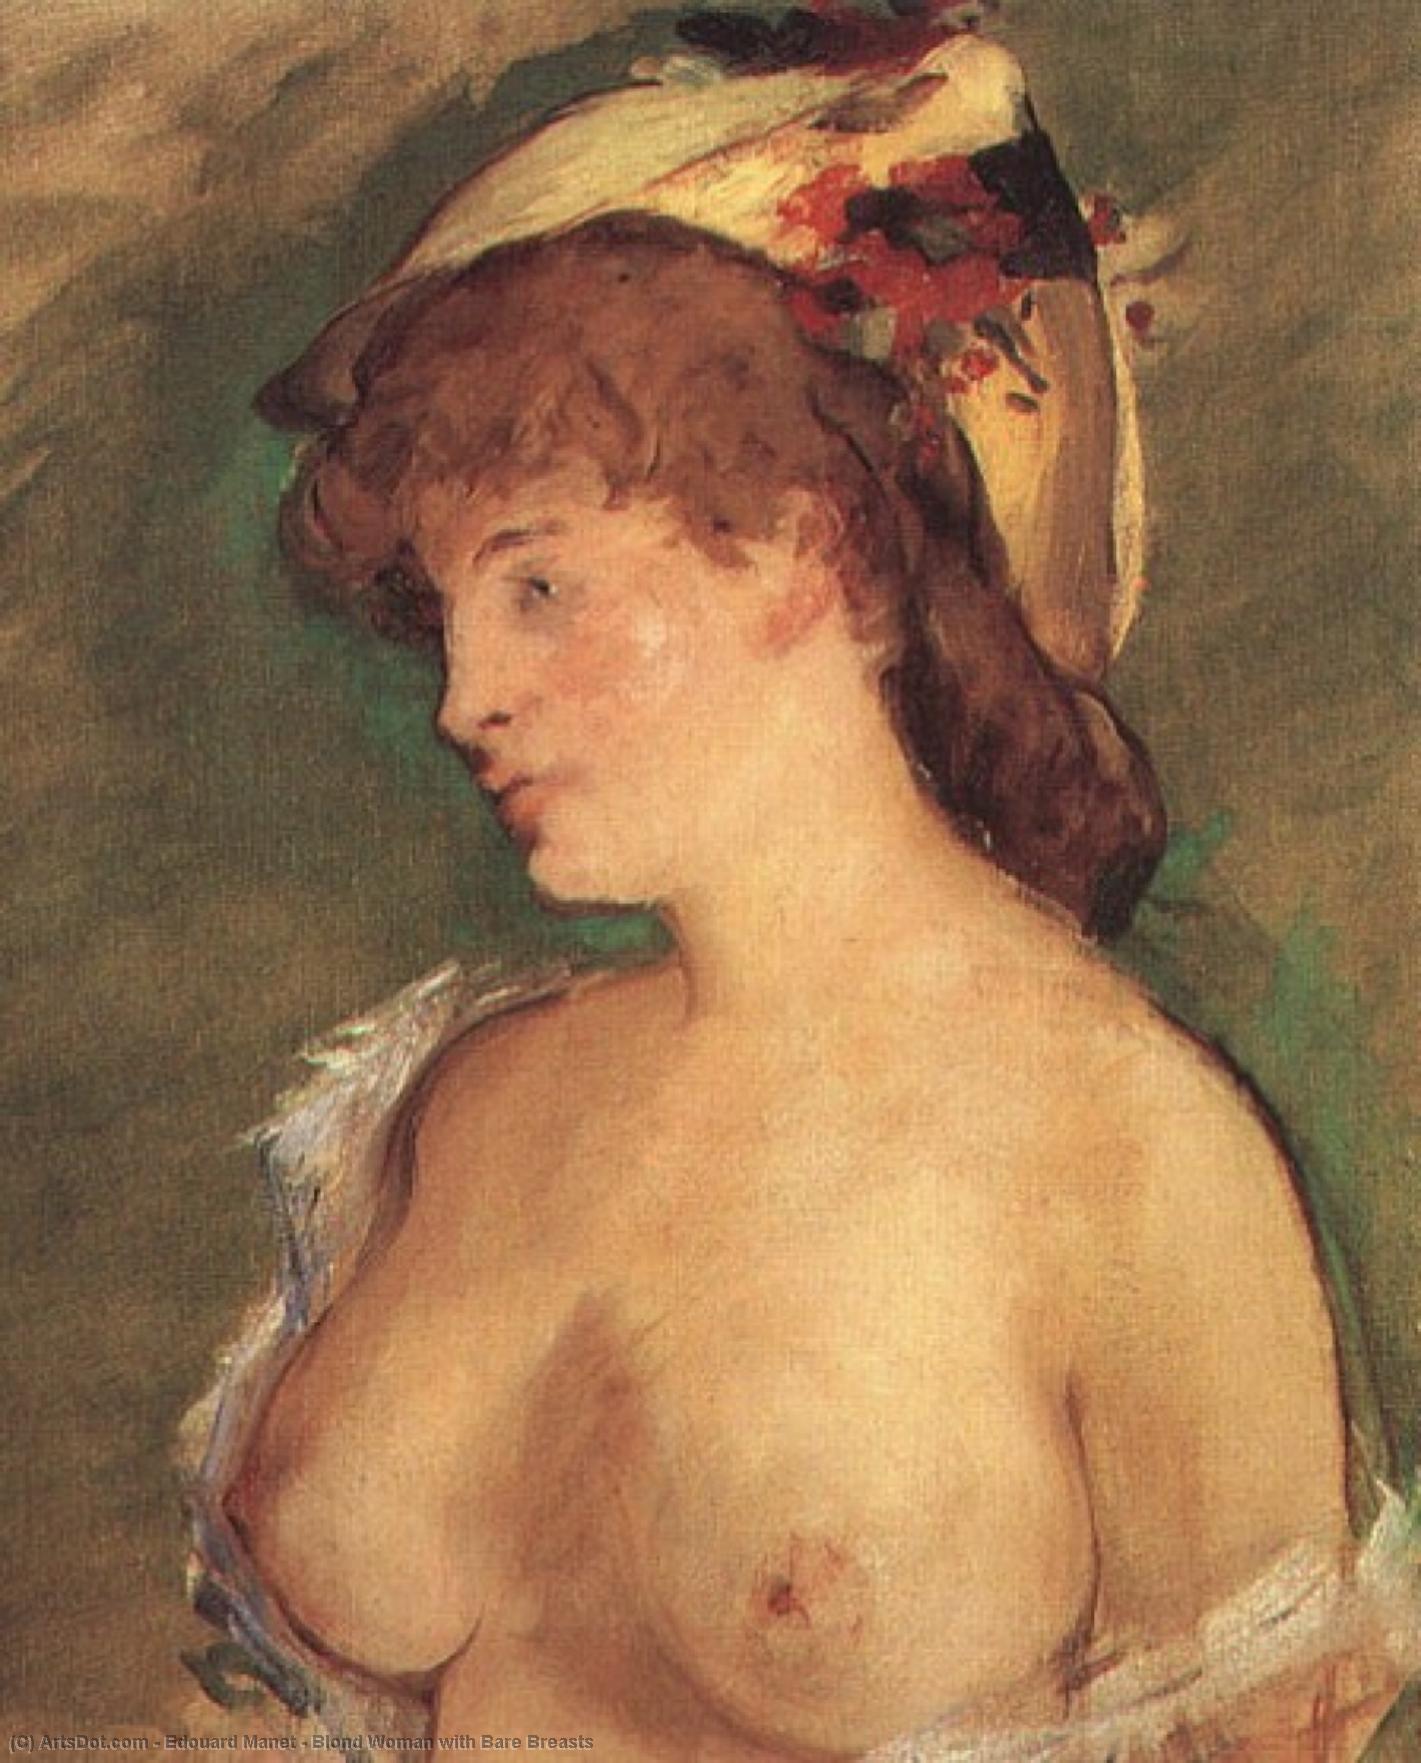 Edouard-manet-blond-woman-with-bare-breasts